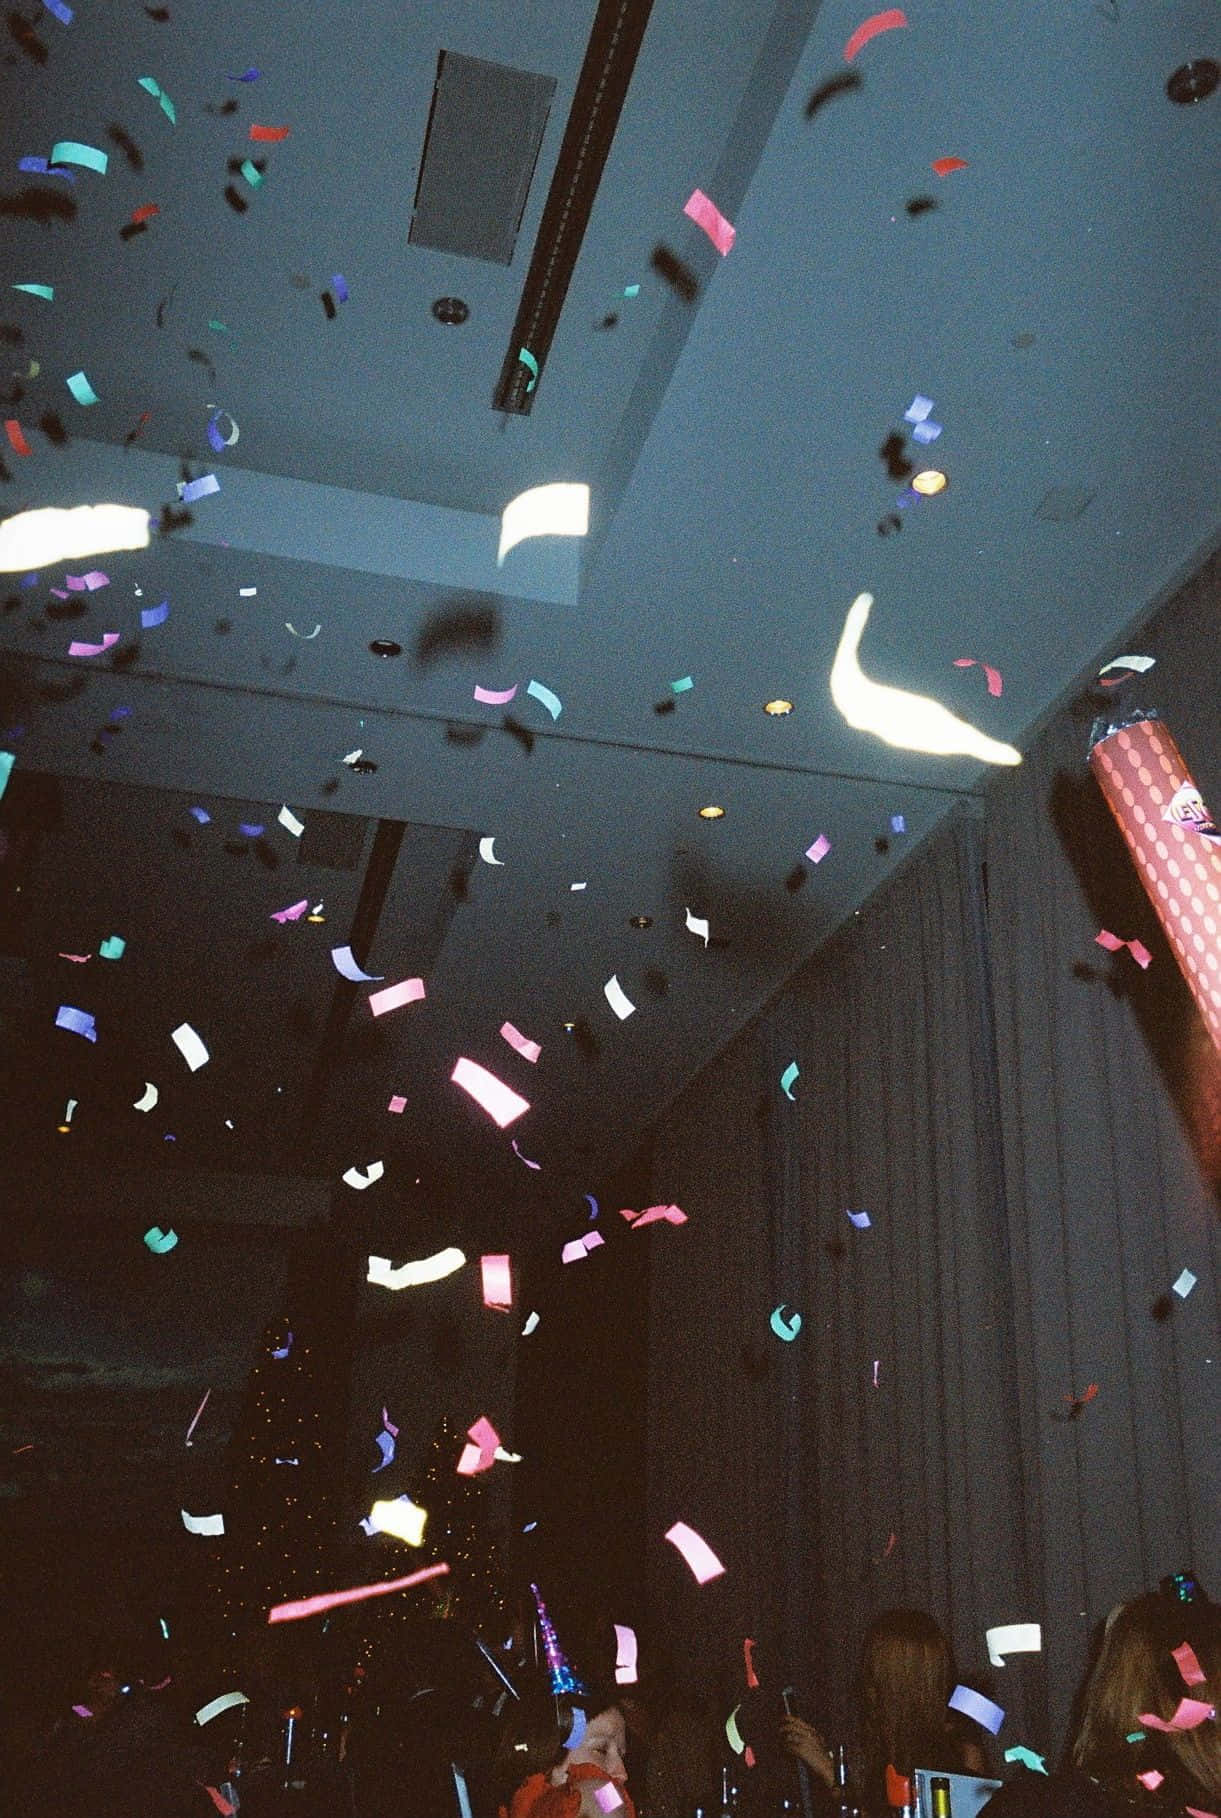 Confetti Falling From The Ceiling